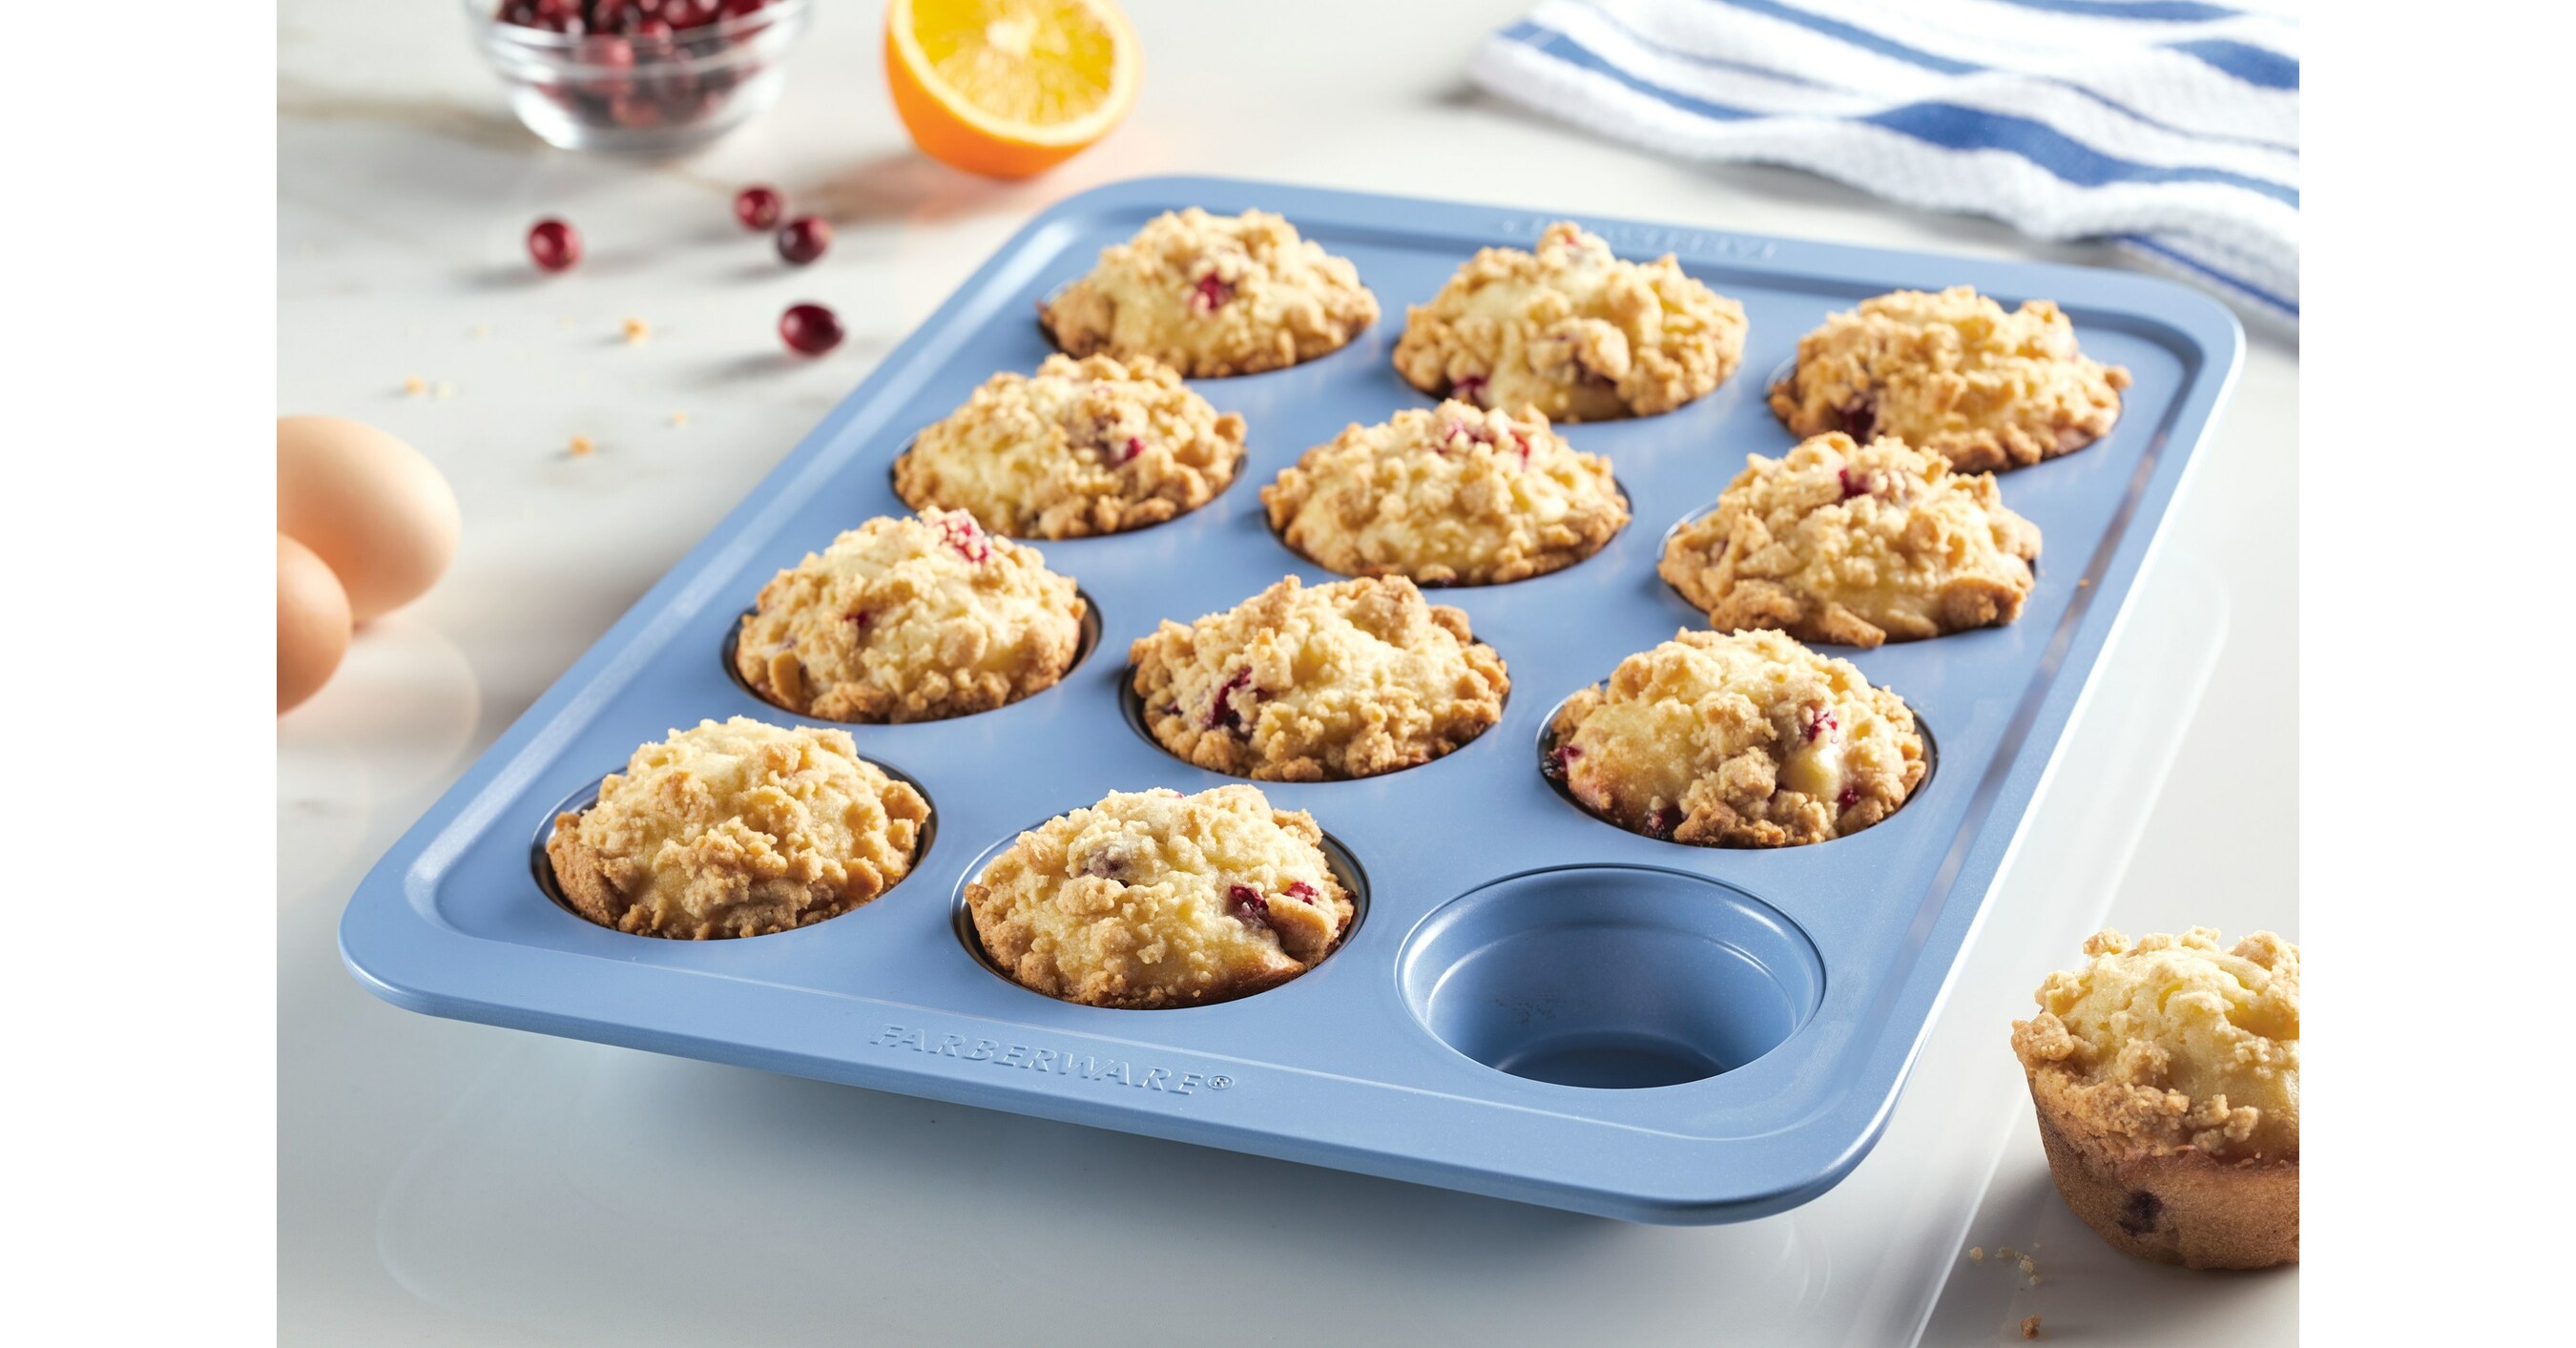 https://mma.prnewswire.com/media/2191836/Meyer_Corporation_12_Cup_Muffin_Pan_Blue_with_Muffins.jpg?p=facebook